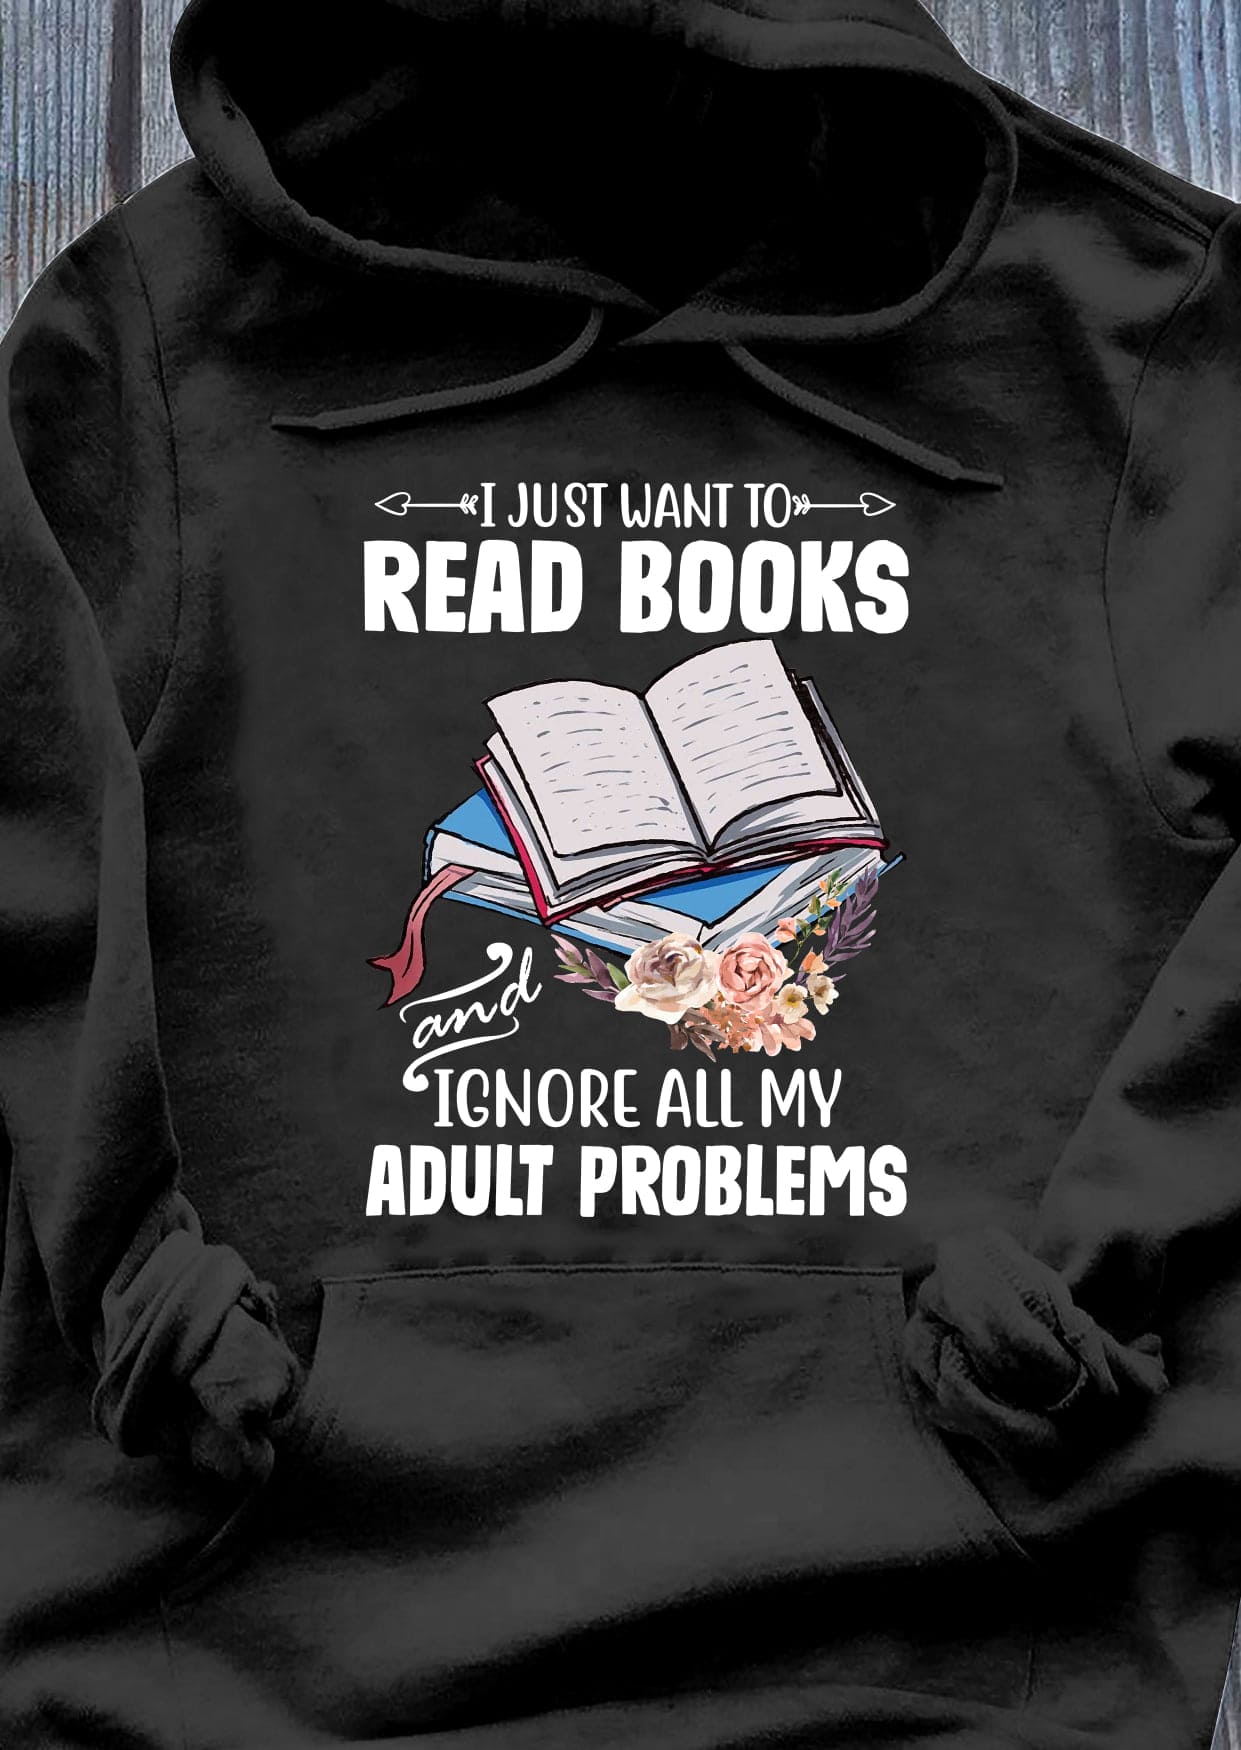 Book Graphic T-shirt - I just want to read books and ignore all my adult problems